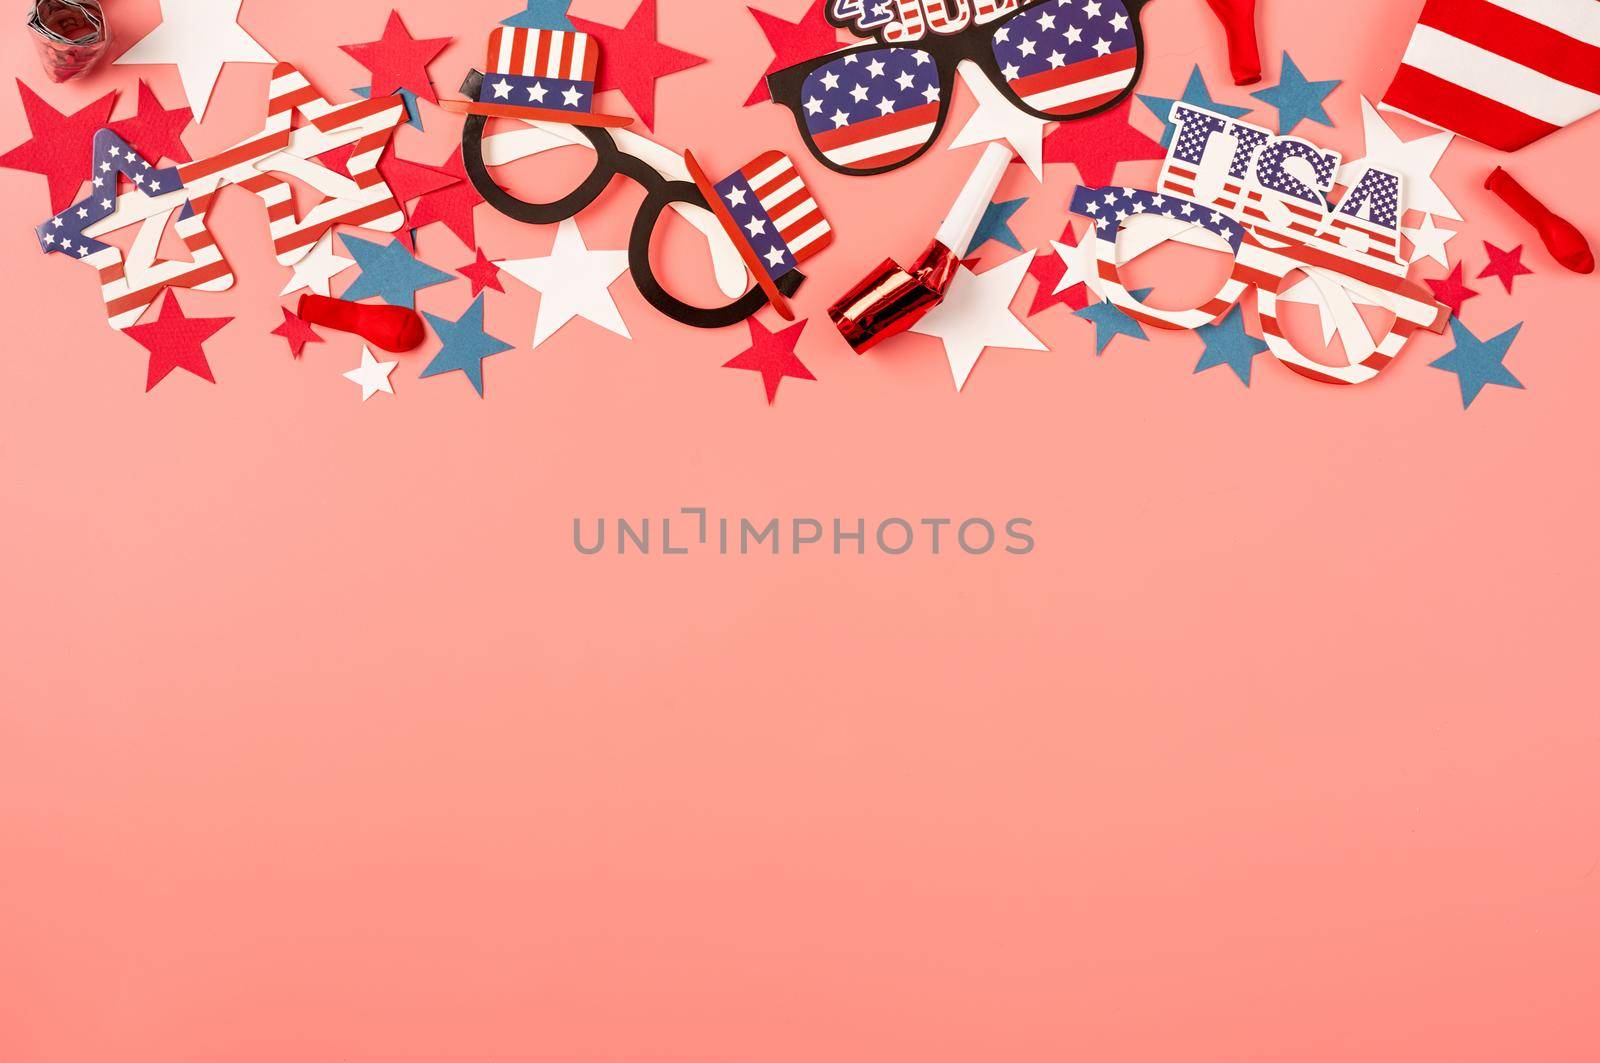 USA Memorial day, Presidents day, Veterans day, Labor day, or 4th of July celebration. USA independence day party element top view flat lay on solid pink background